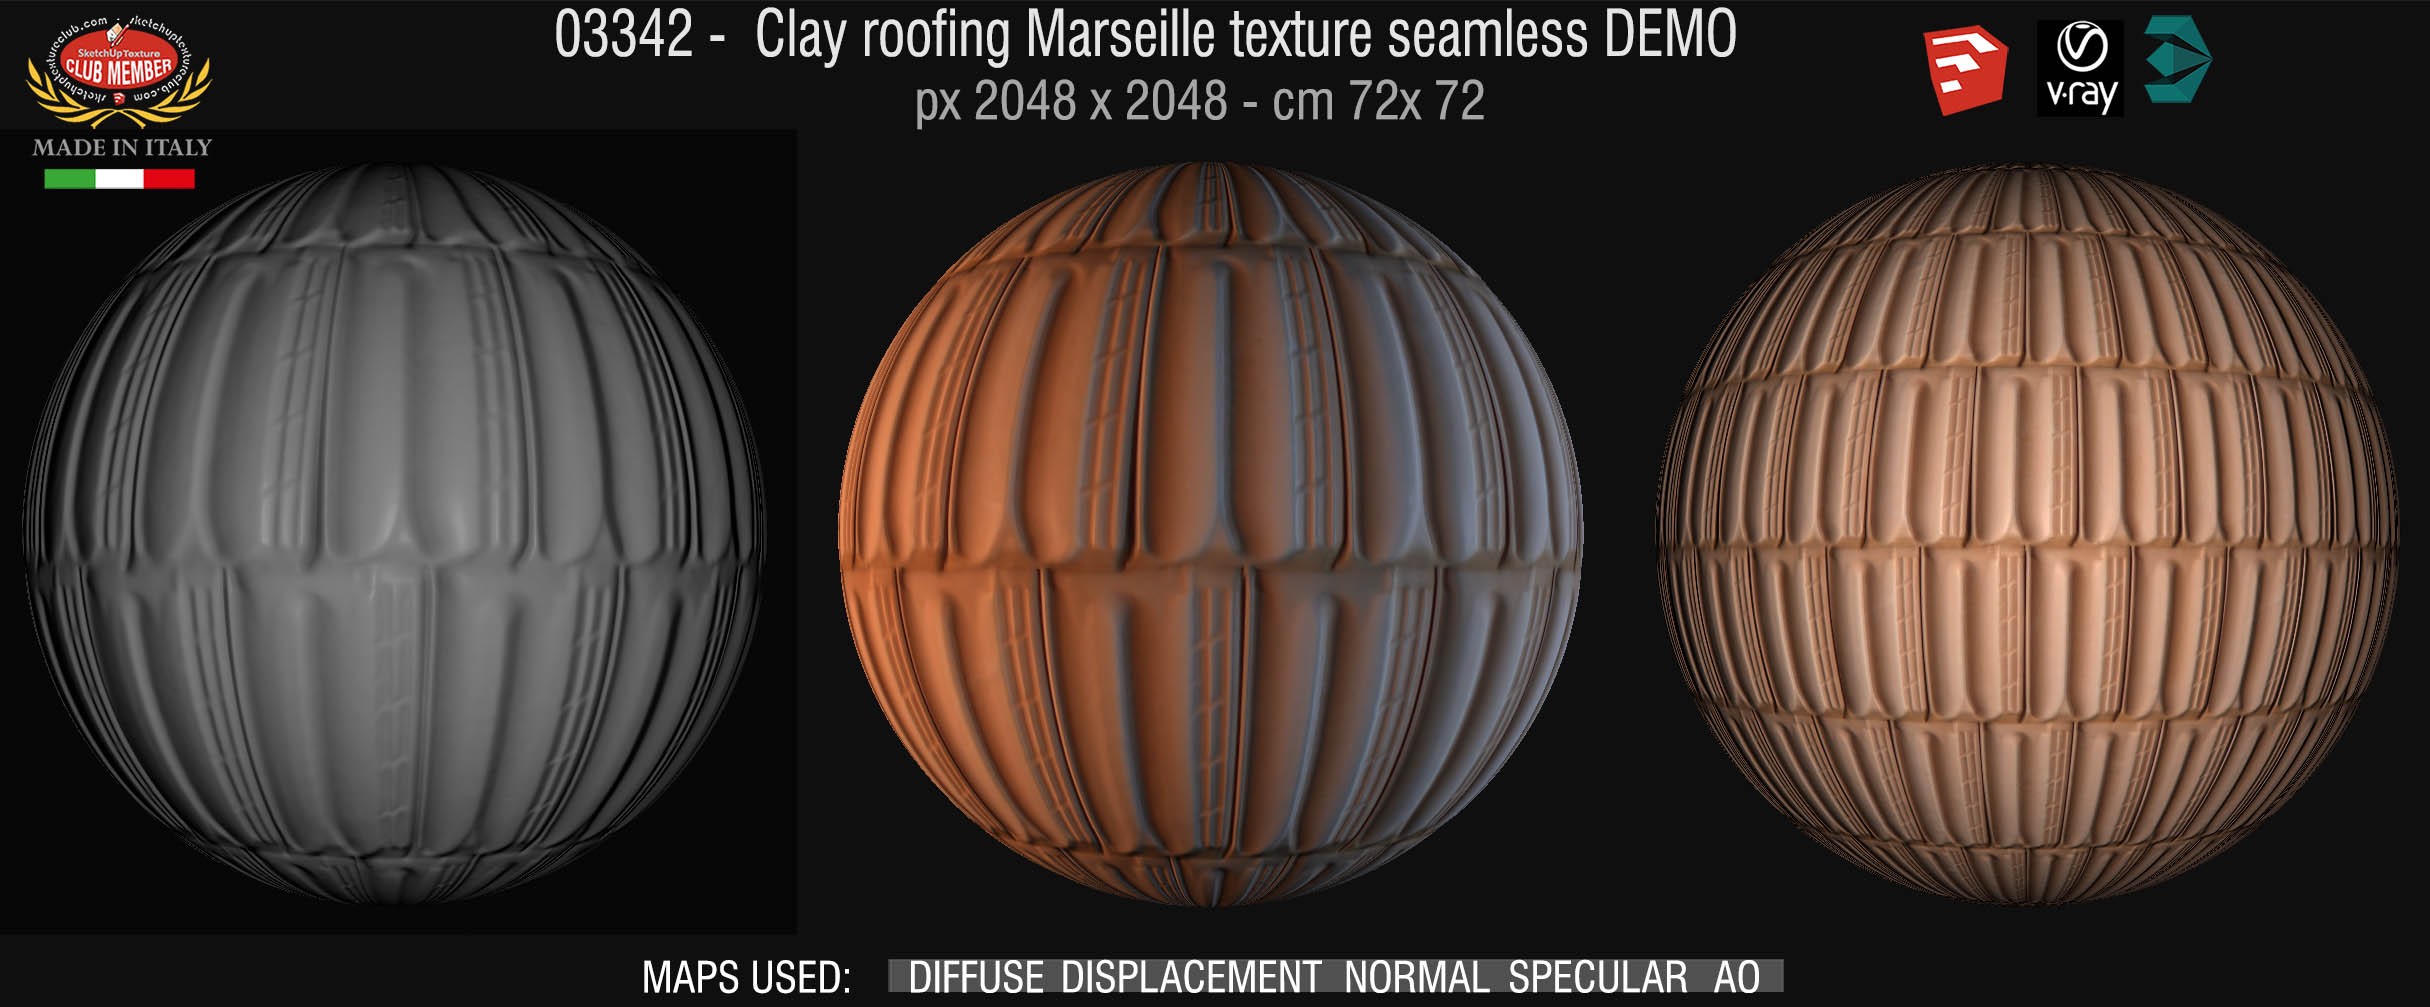 03342 Clay roofing Marseille texture seamless + maps DEMO